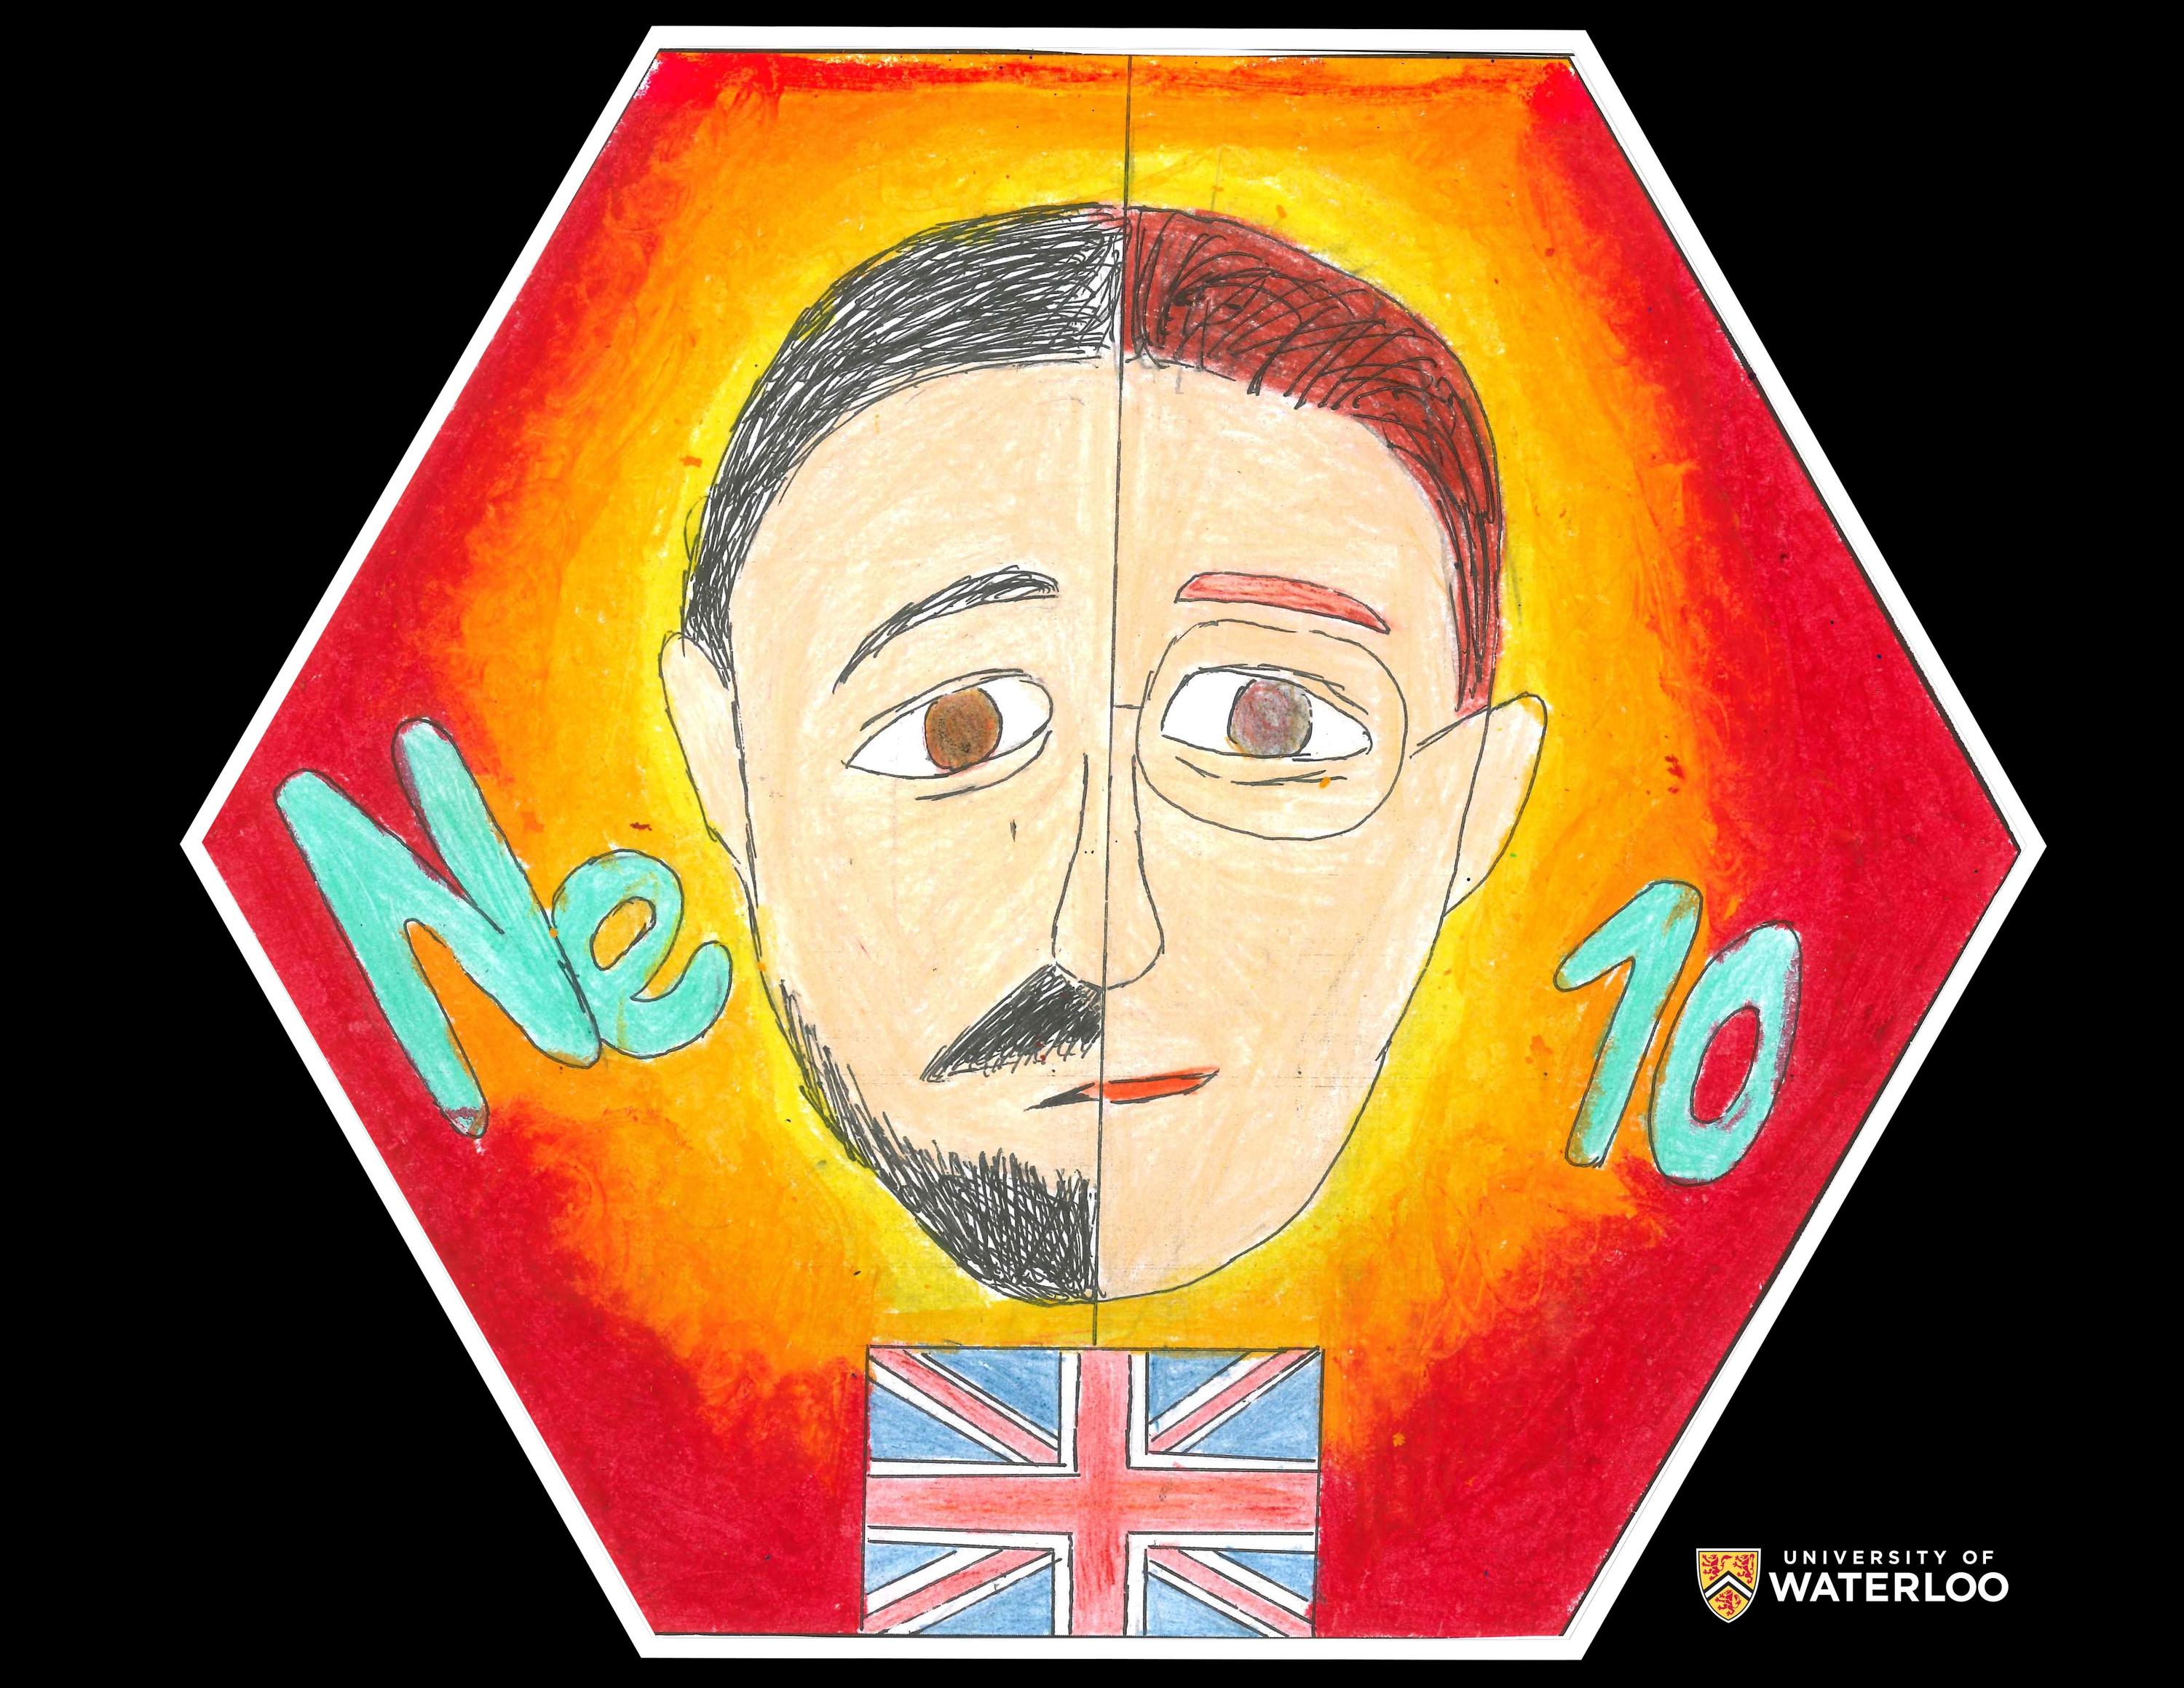 Pen and acrylic on paper. Split face of Sir William Ramsay and Morris Travers appears centre on a bright yellow, orange and red background. Chemical symbol “Ne” to the left; “10” to the right. The United Kingdom’s national flag appears at the bottom.